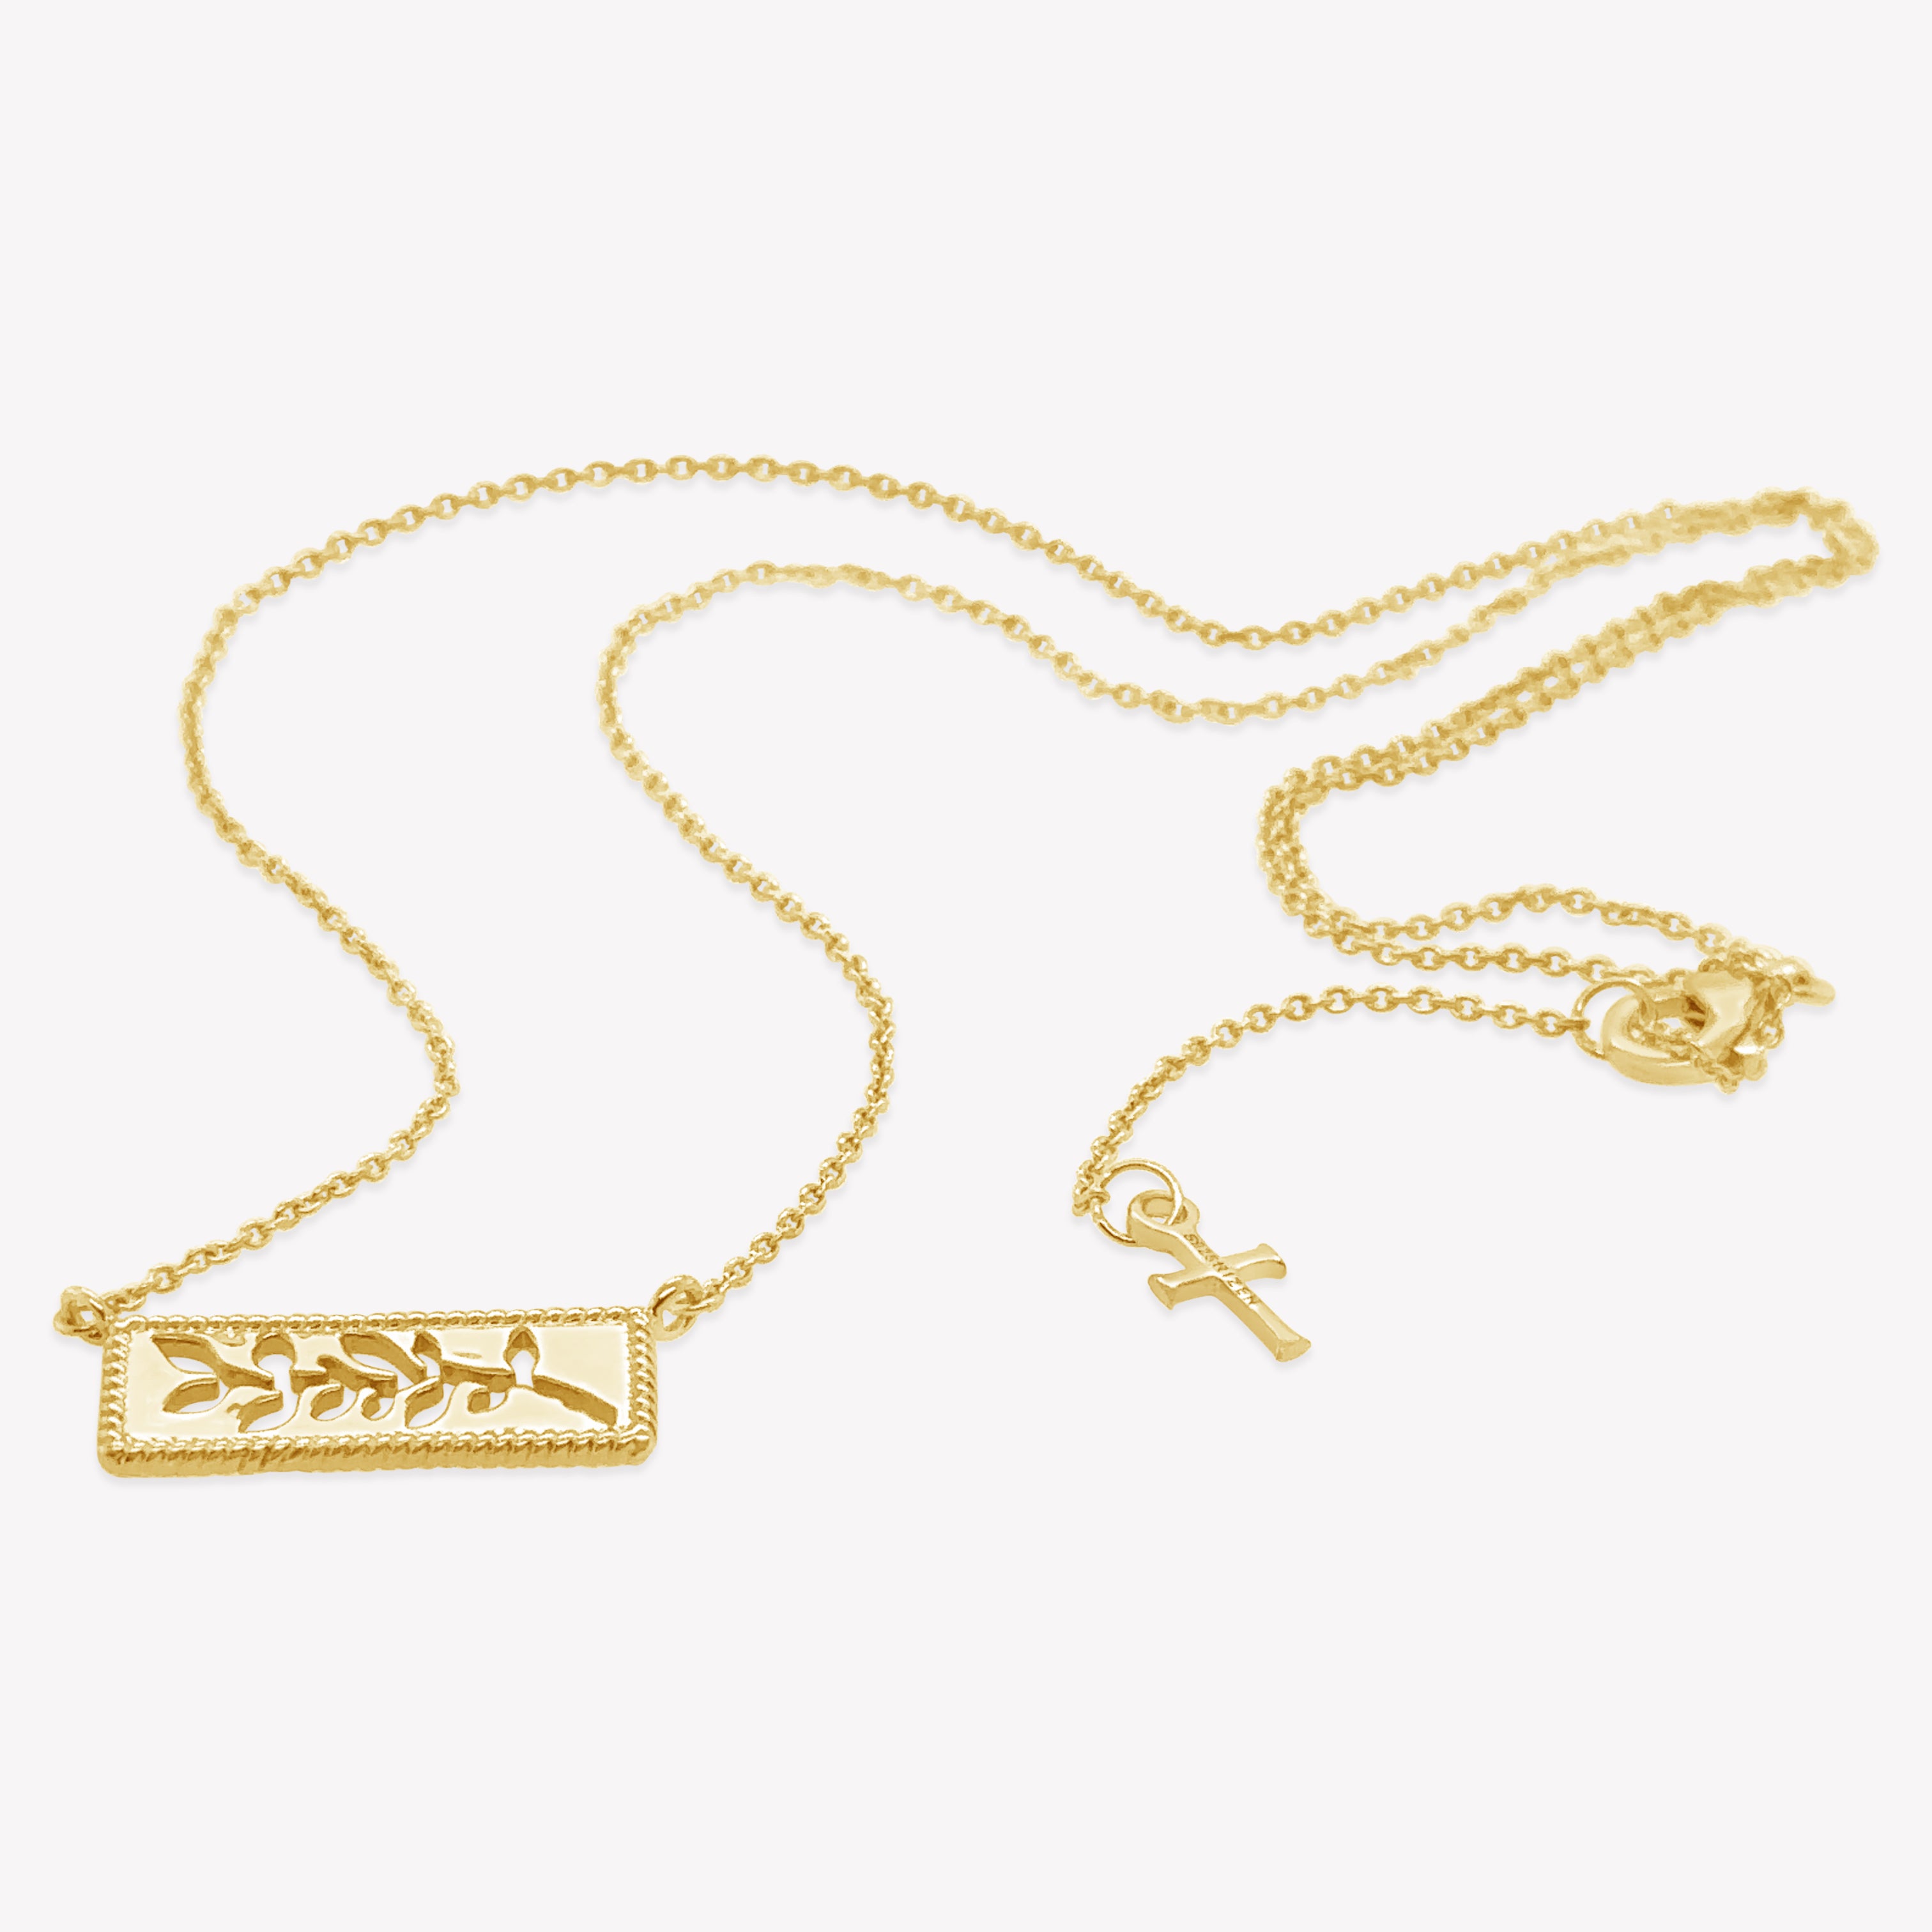 Intricately designed 18K gold vermeil Olive Branch Necklace from the Rooted Collection by Rizen Jewelry.